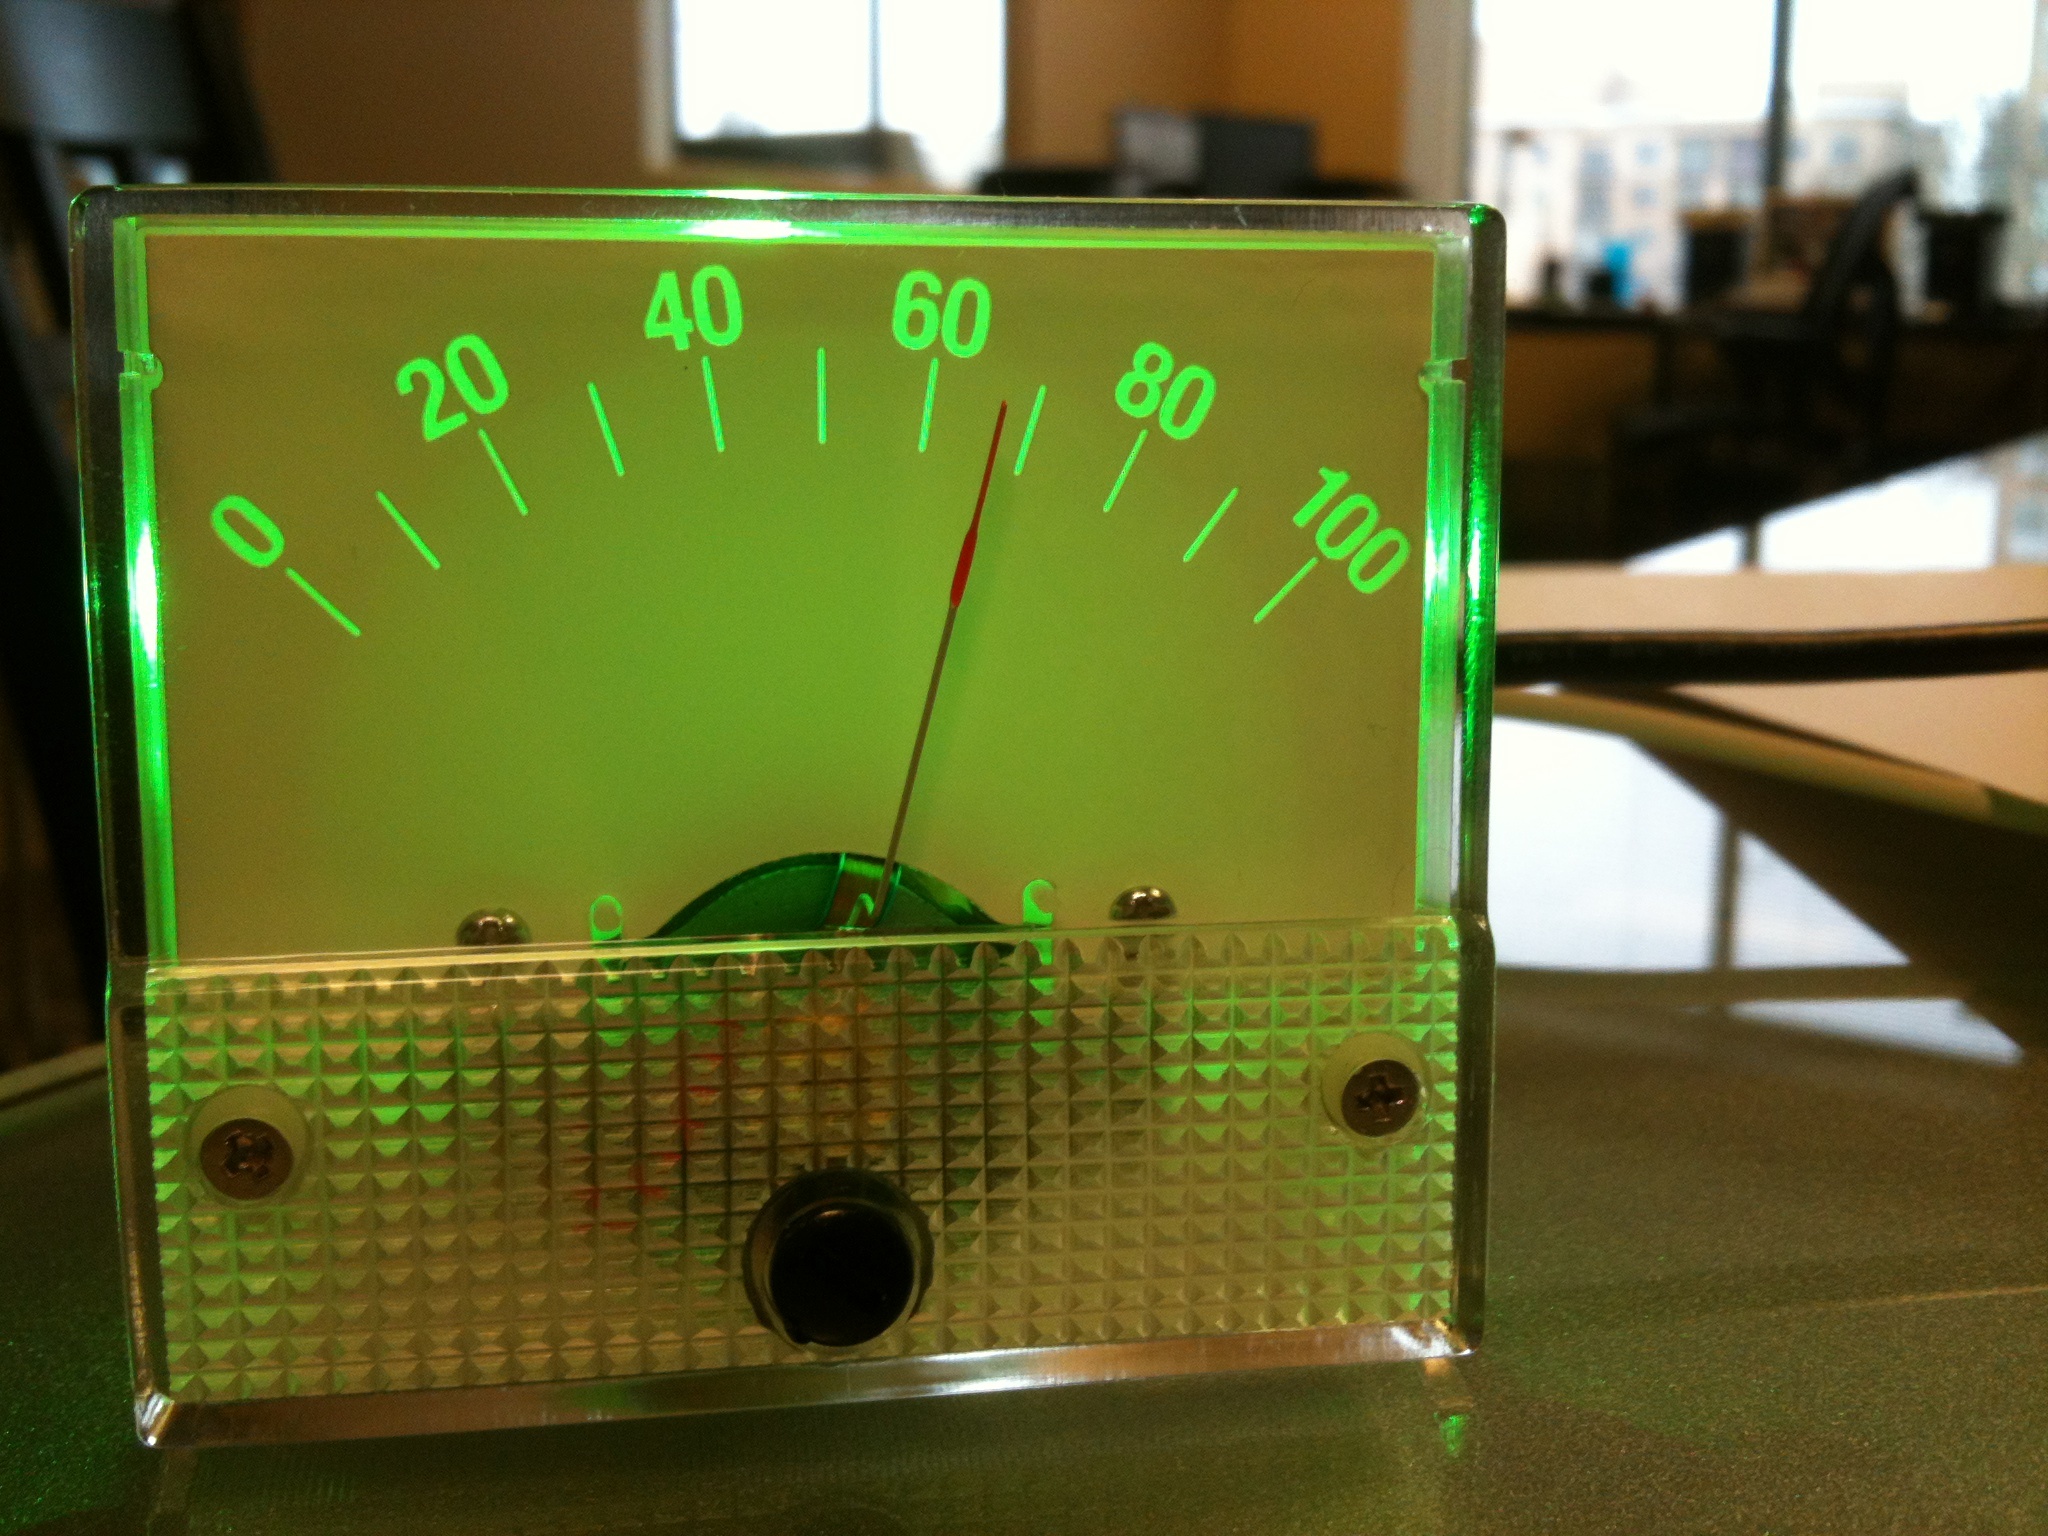 The Monulator: USB-controlled analog panel meter with RGB backlight.